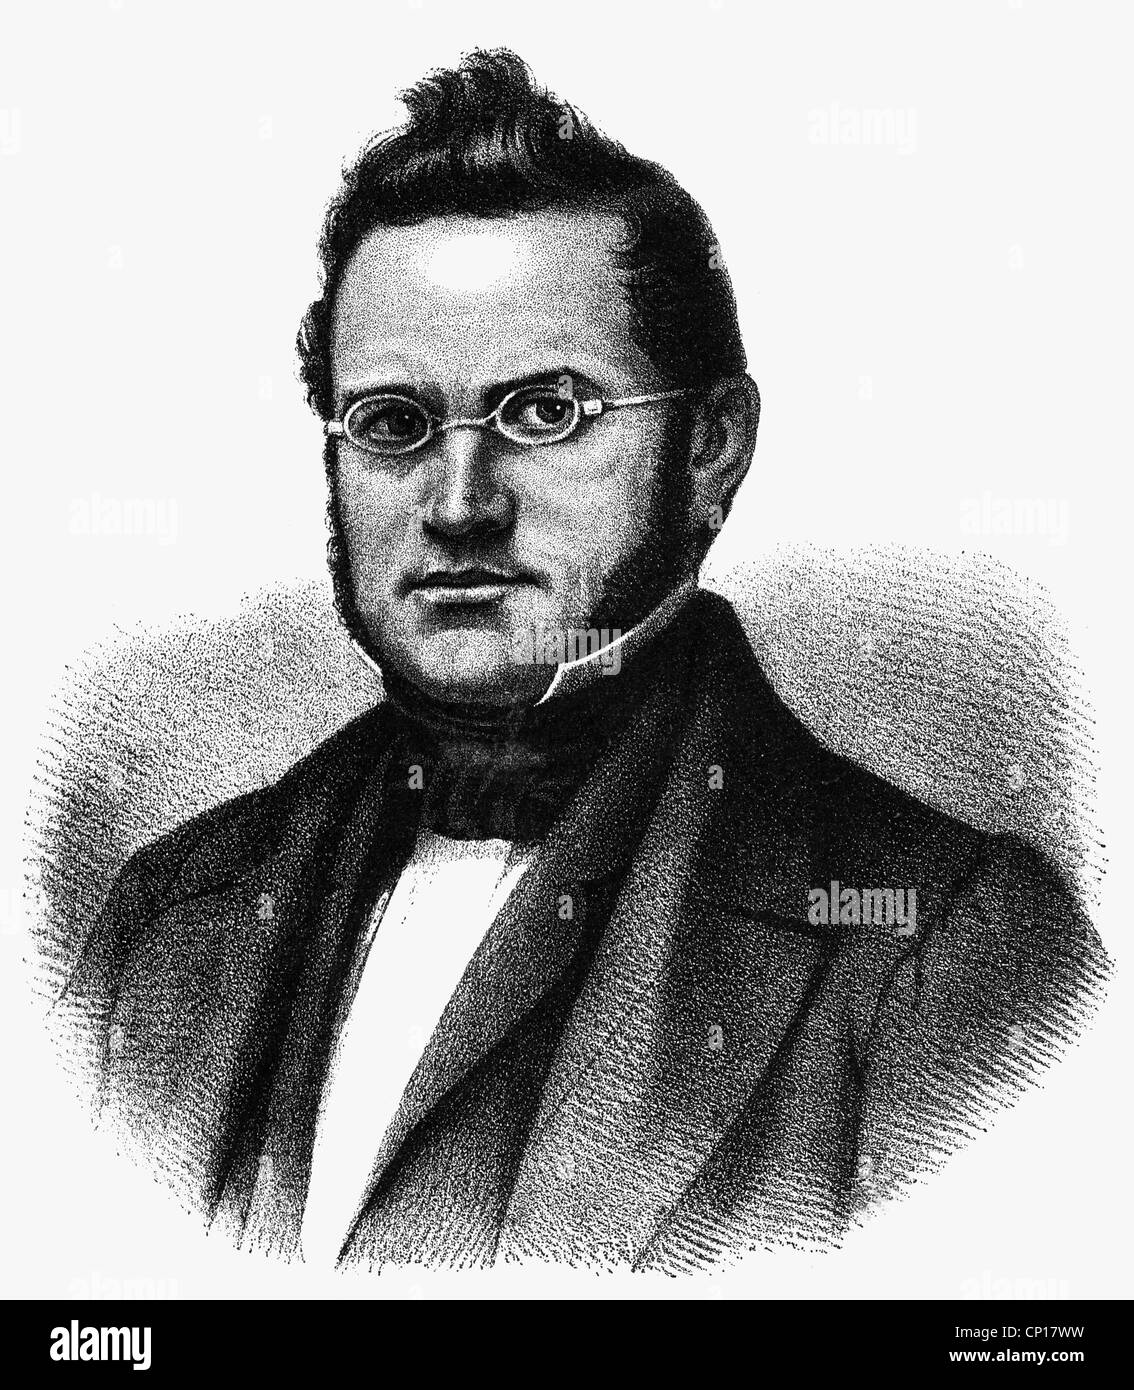 Furrer, Jonas, 3.3.1805 - 25.7.1861, Swiss politician, first President of the Confederation 1848, portrait, lithograph by Brummer & Co., 19th century, Stock Photo